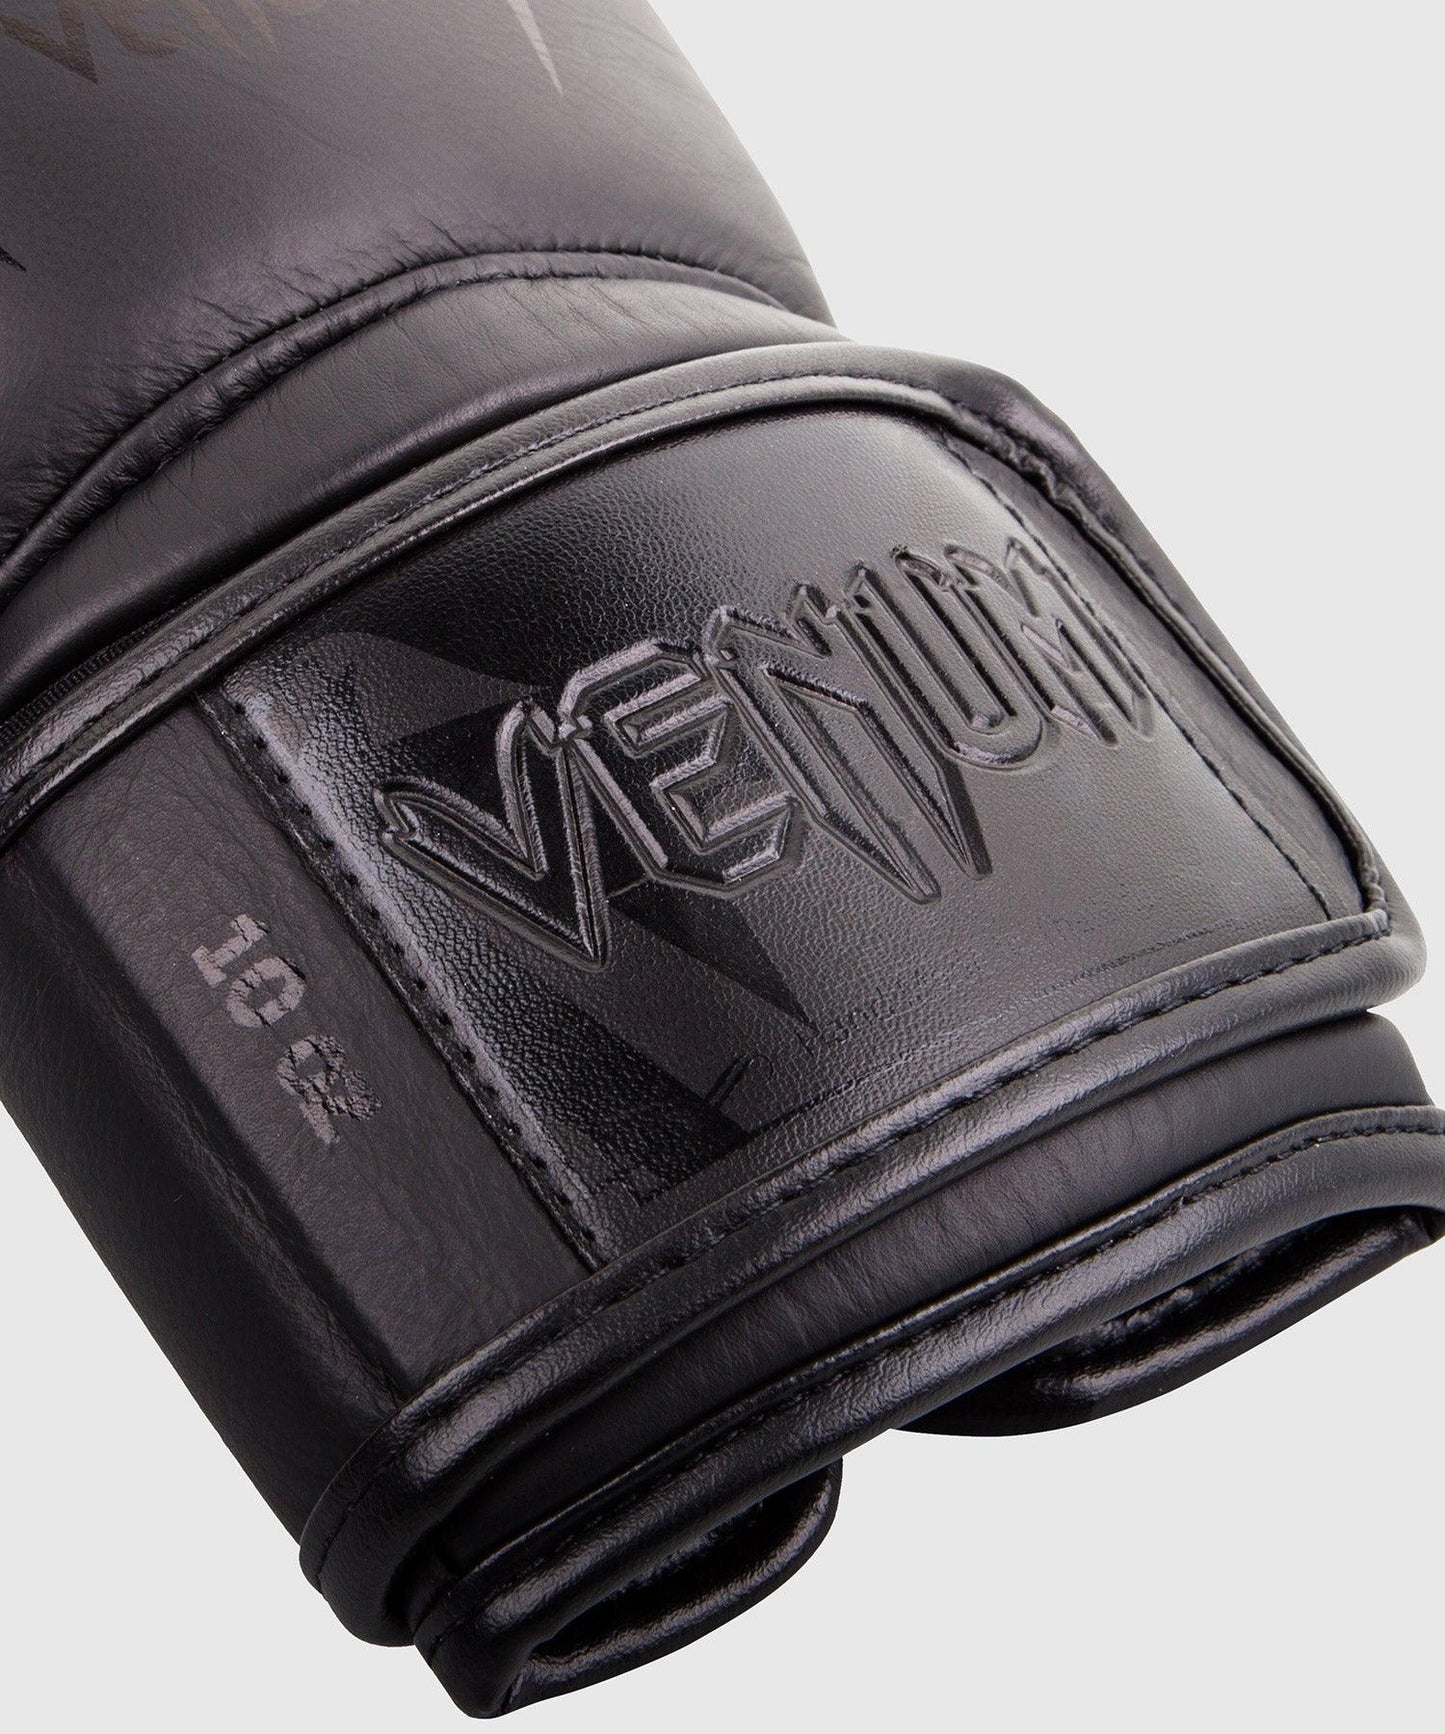 Venum Giant 3.0 Boxing Gloves - Nappa Leather - Black/Black Picture 4